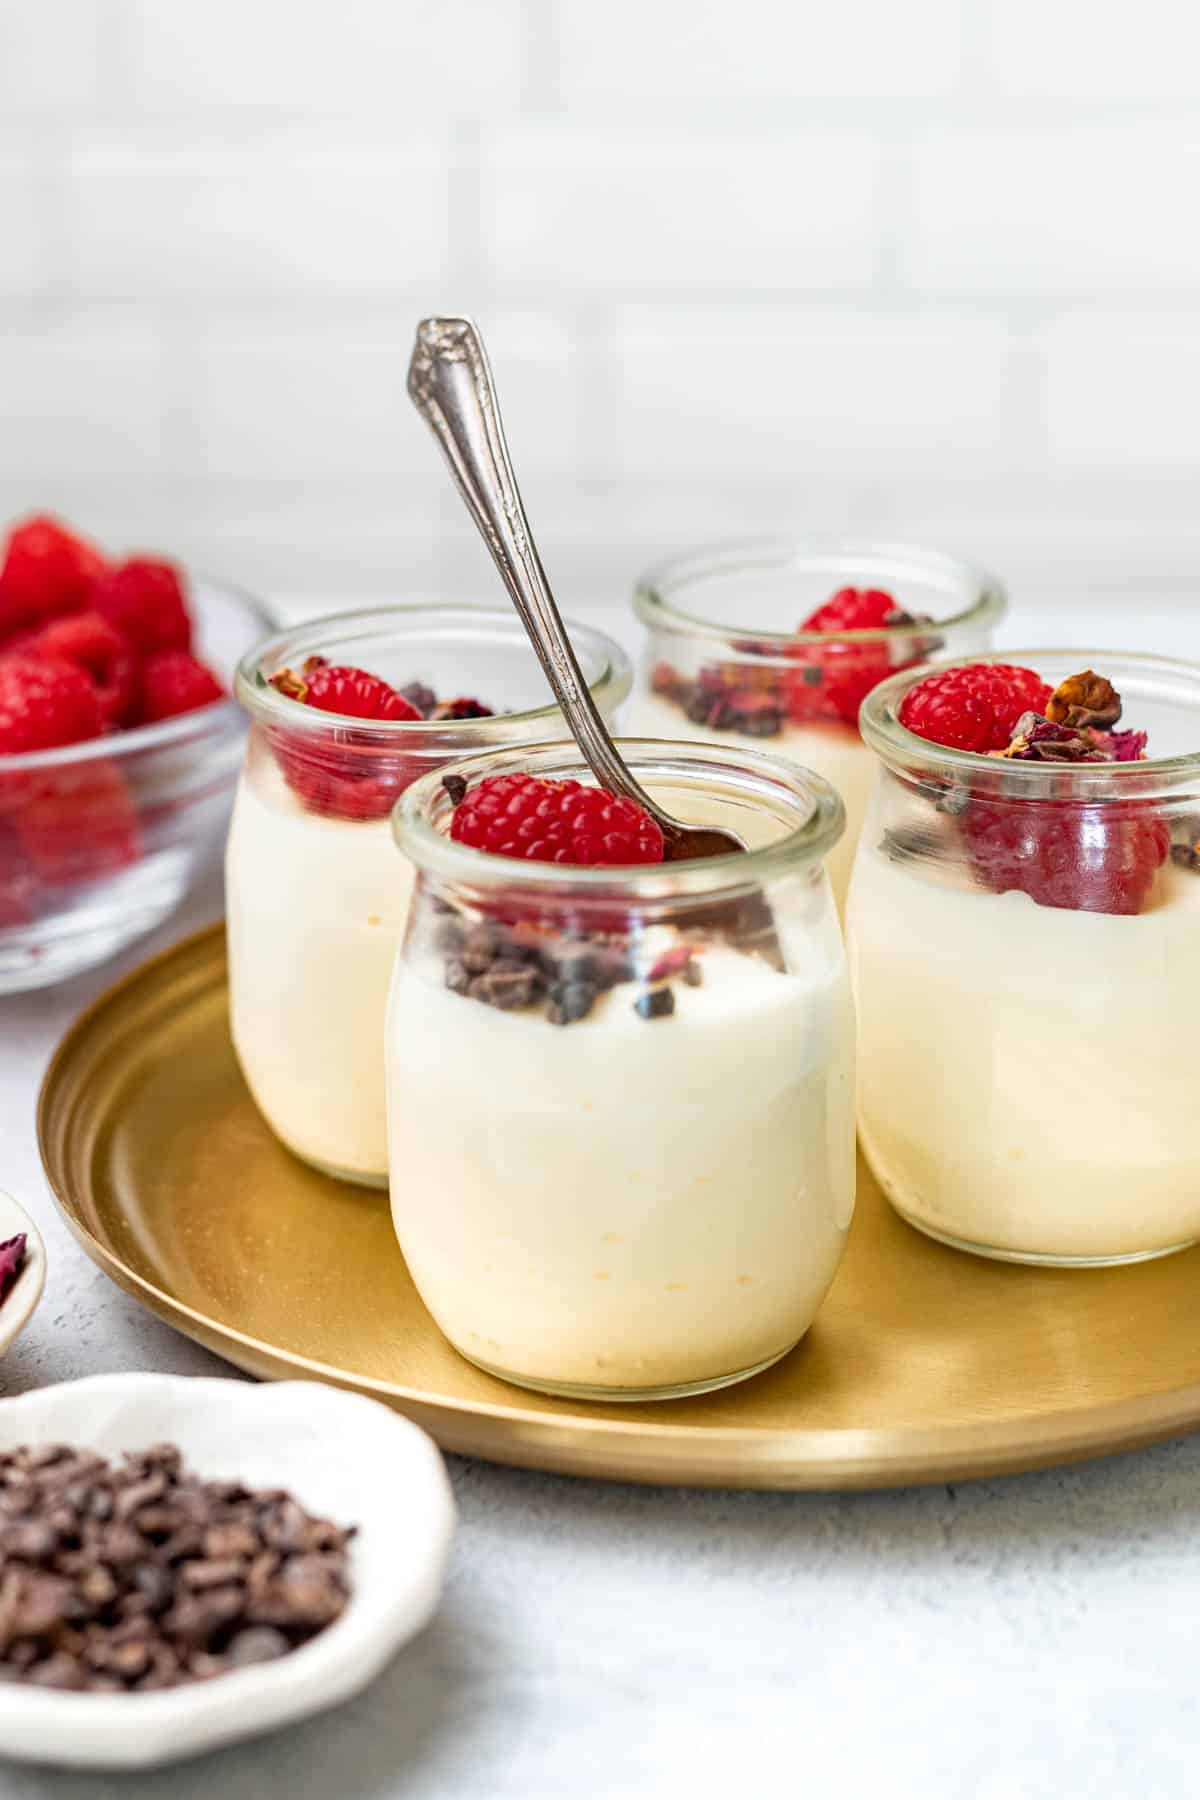 Four small glass cups of white chocolate mousse topped with raspberries.